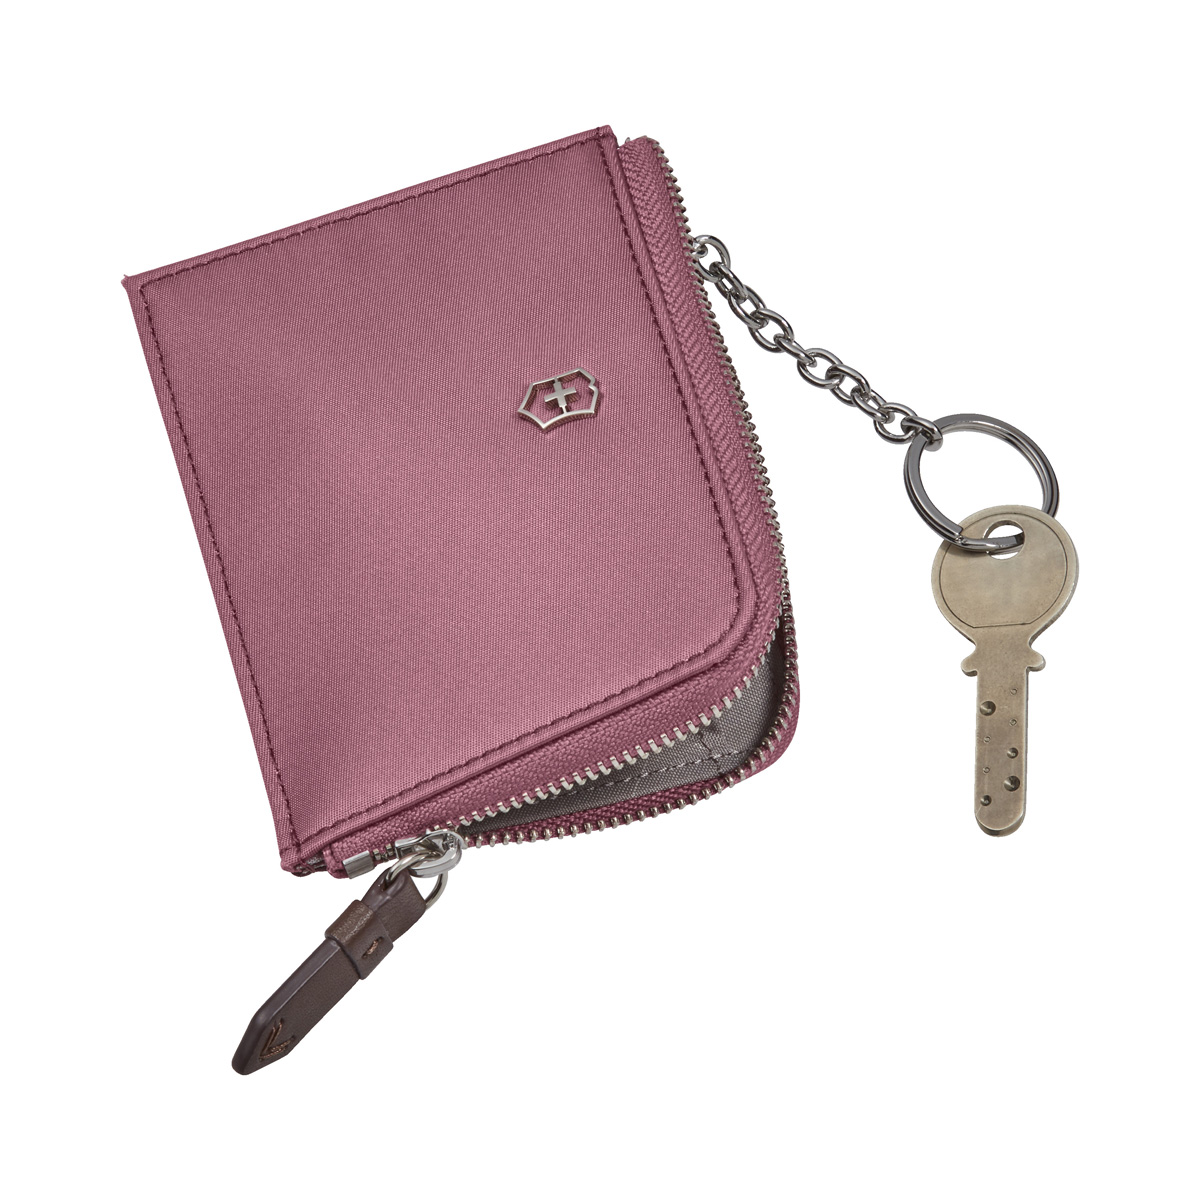 Victorinox Victoria 2.0 Key and Card Holder with Leather Interior | eBay